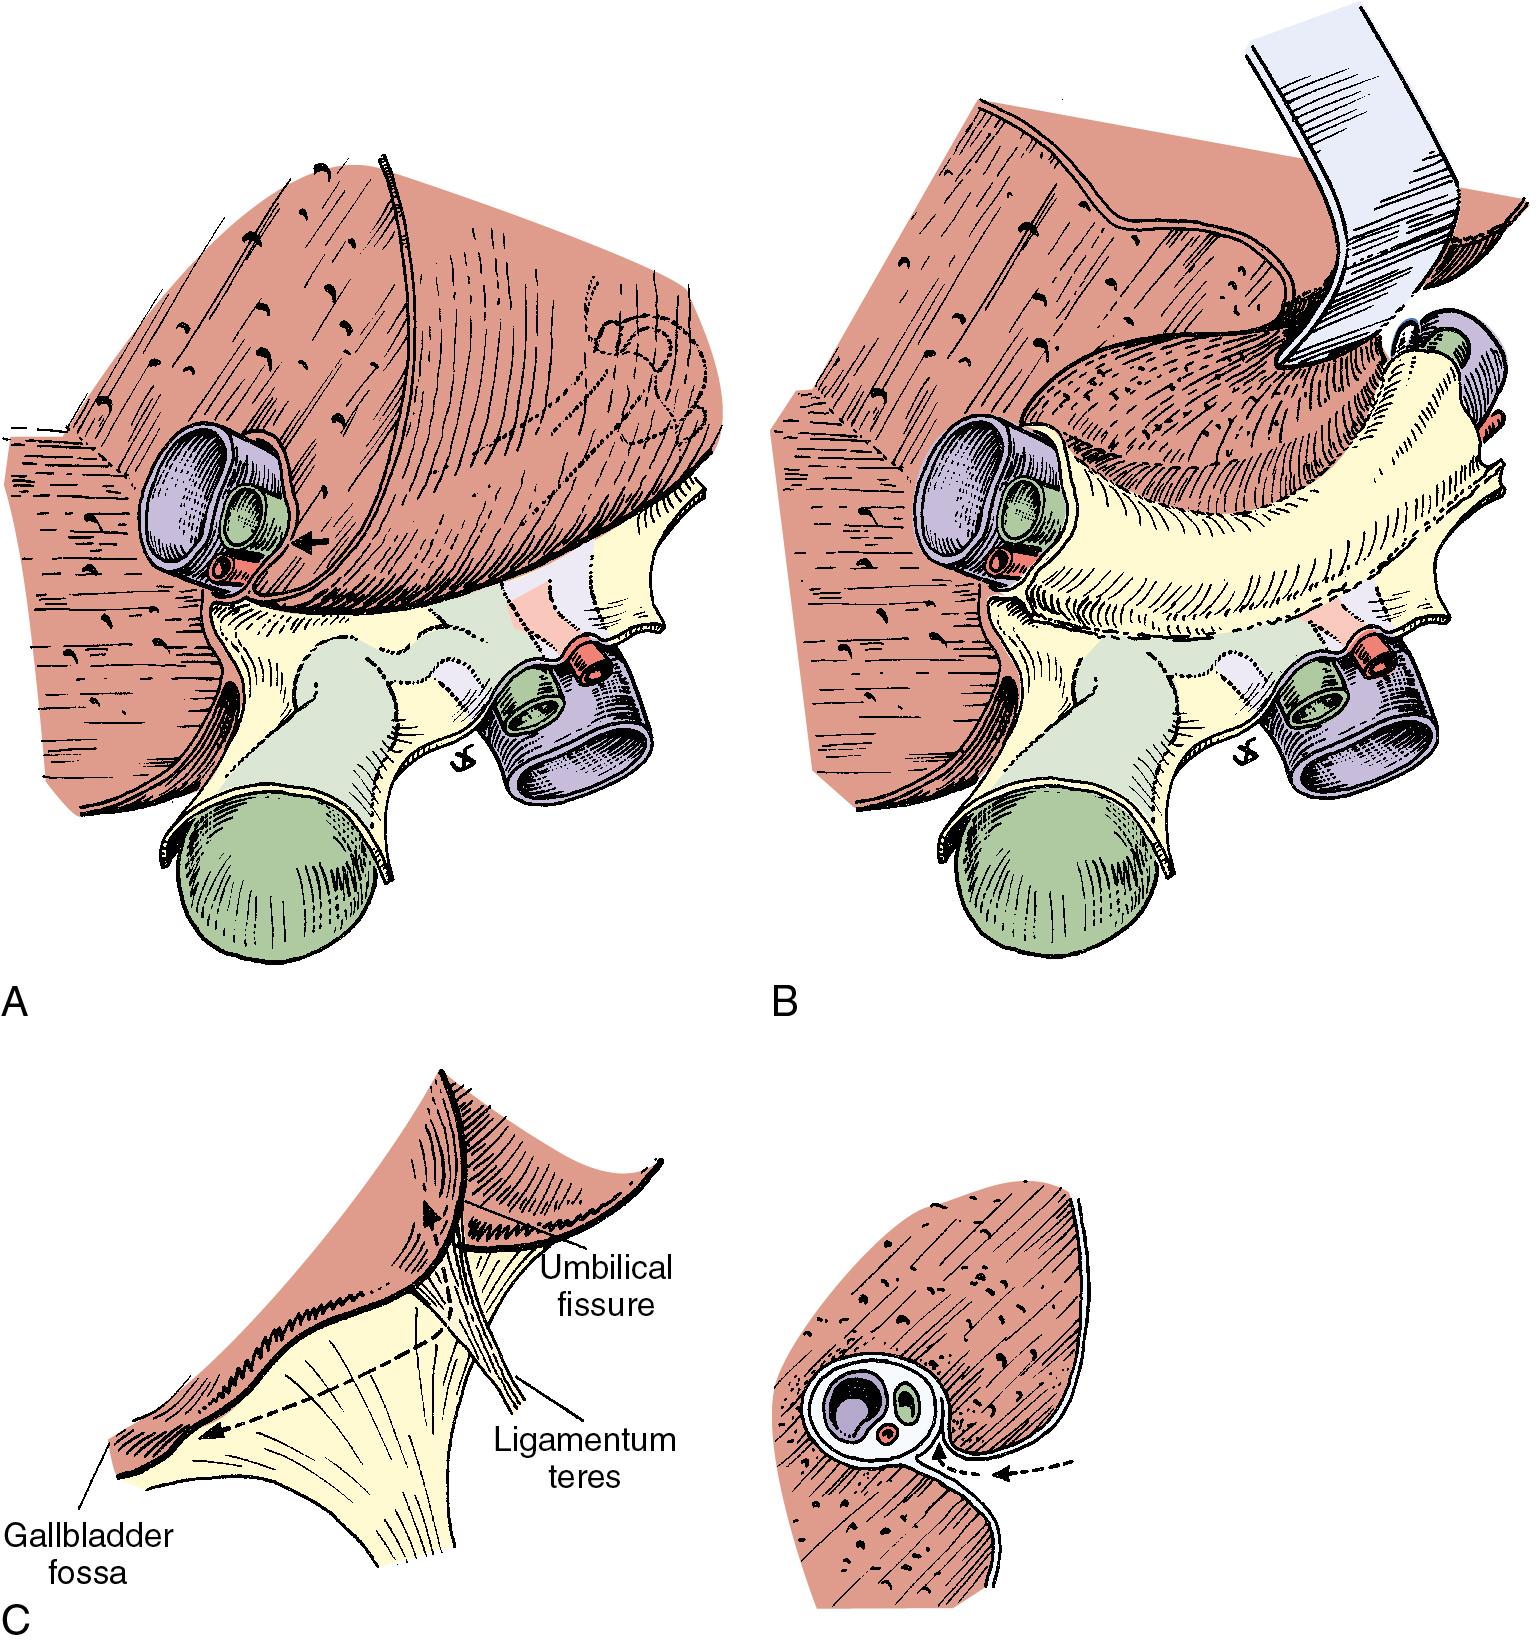 FIGURE 2.20, A, Relationship between the posterior aspect of segment IV and the biliary confluence. The hilar plate (arrow) is formed by the fusion of the connective tissue enclosing the biliary and vascular elements with the Glisson capsule. B, Biliary confluence and left hepatic duct exposed by lifting segment IV upward after incision of the Glisson capsule at its base. This technique, lowering of the hilar plate , generally is used to display a dilated bile duct above an iatrogenic stricture or hilar cholangiocarcinoma. C, Line of incision (left) to allow extensive mobilization of segment IV. This maneuver is of particular value for high bile duct strictures and in the presence of liver atrophy or hypertrophy. The procedure consists of lifting segment IV upward ( A and B ), then not only opening the umbilical fissure but also incising the deepest portion of the gallbladder fossa. Right , Incision of the Glisson capsule to gain access to the biliary system (arrow).